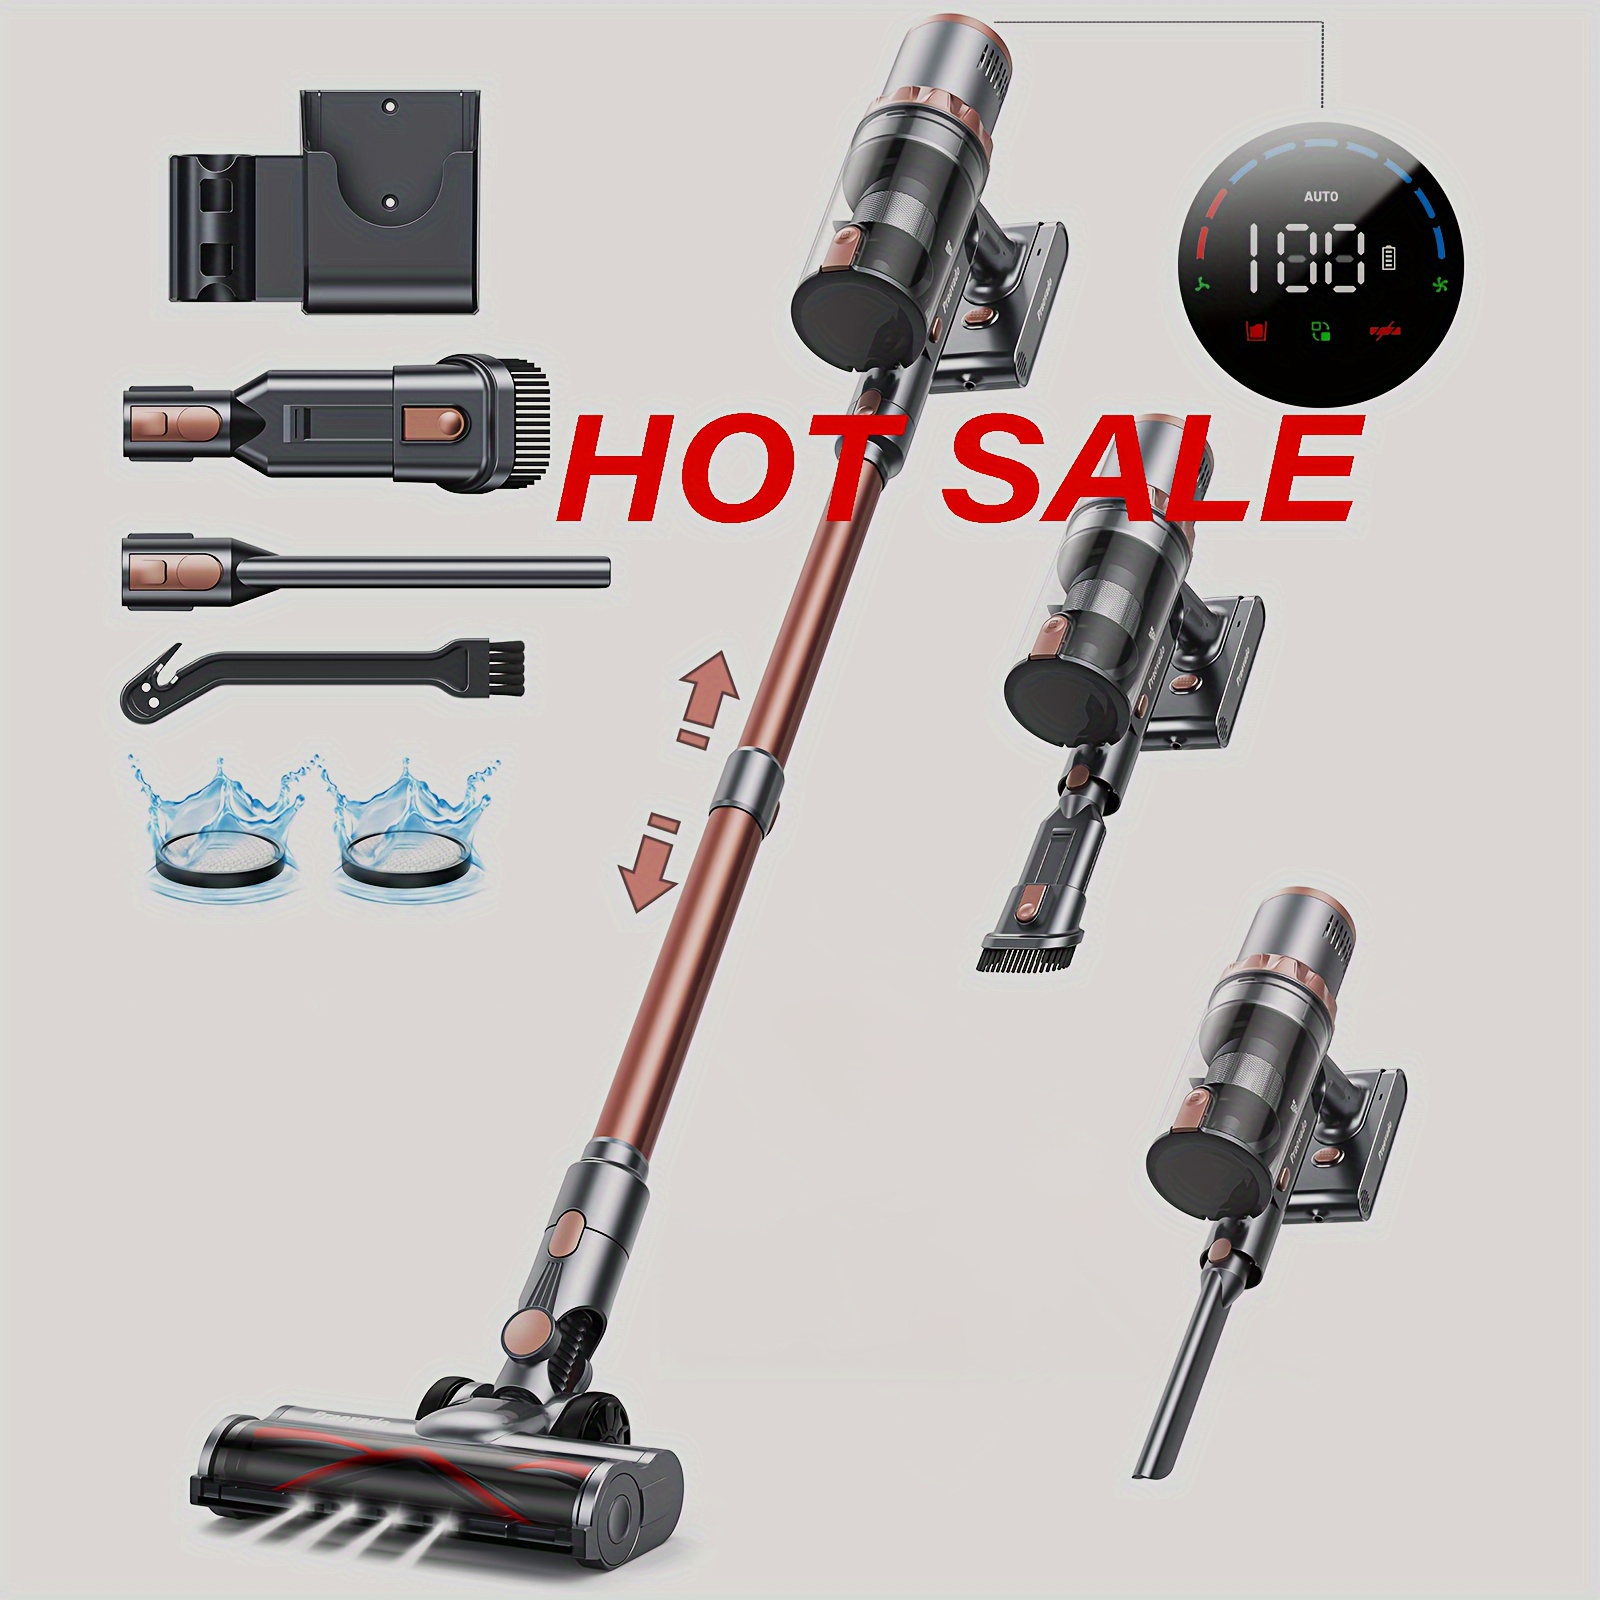 

Cordless Cleaner For Hard Floors, Lightweight Vacuum, Convenient Stick And Handheld Vac,